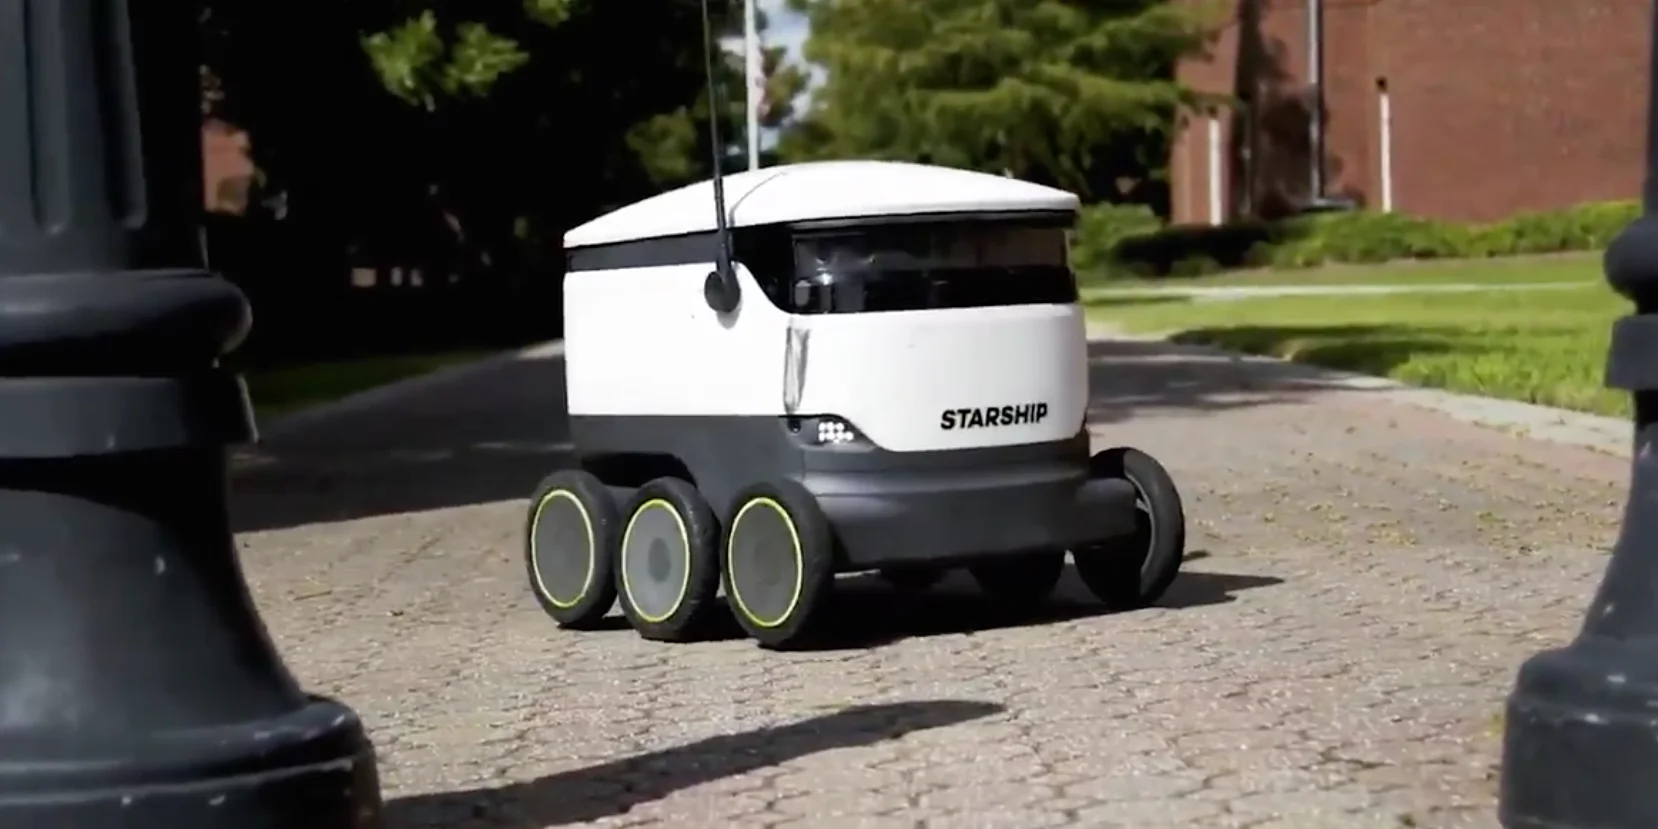 Georgia Southern adds Starship robots for on-campus delivery pic